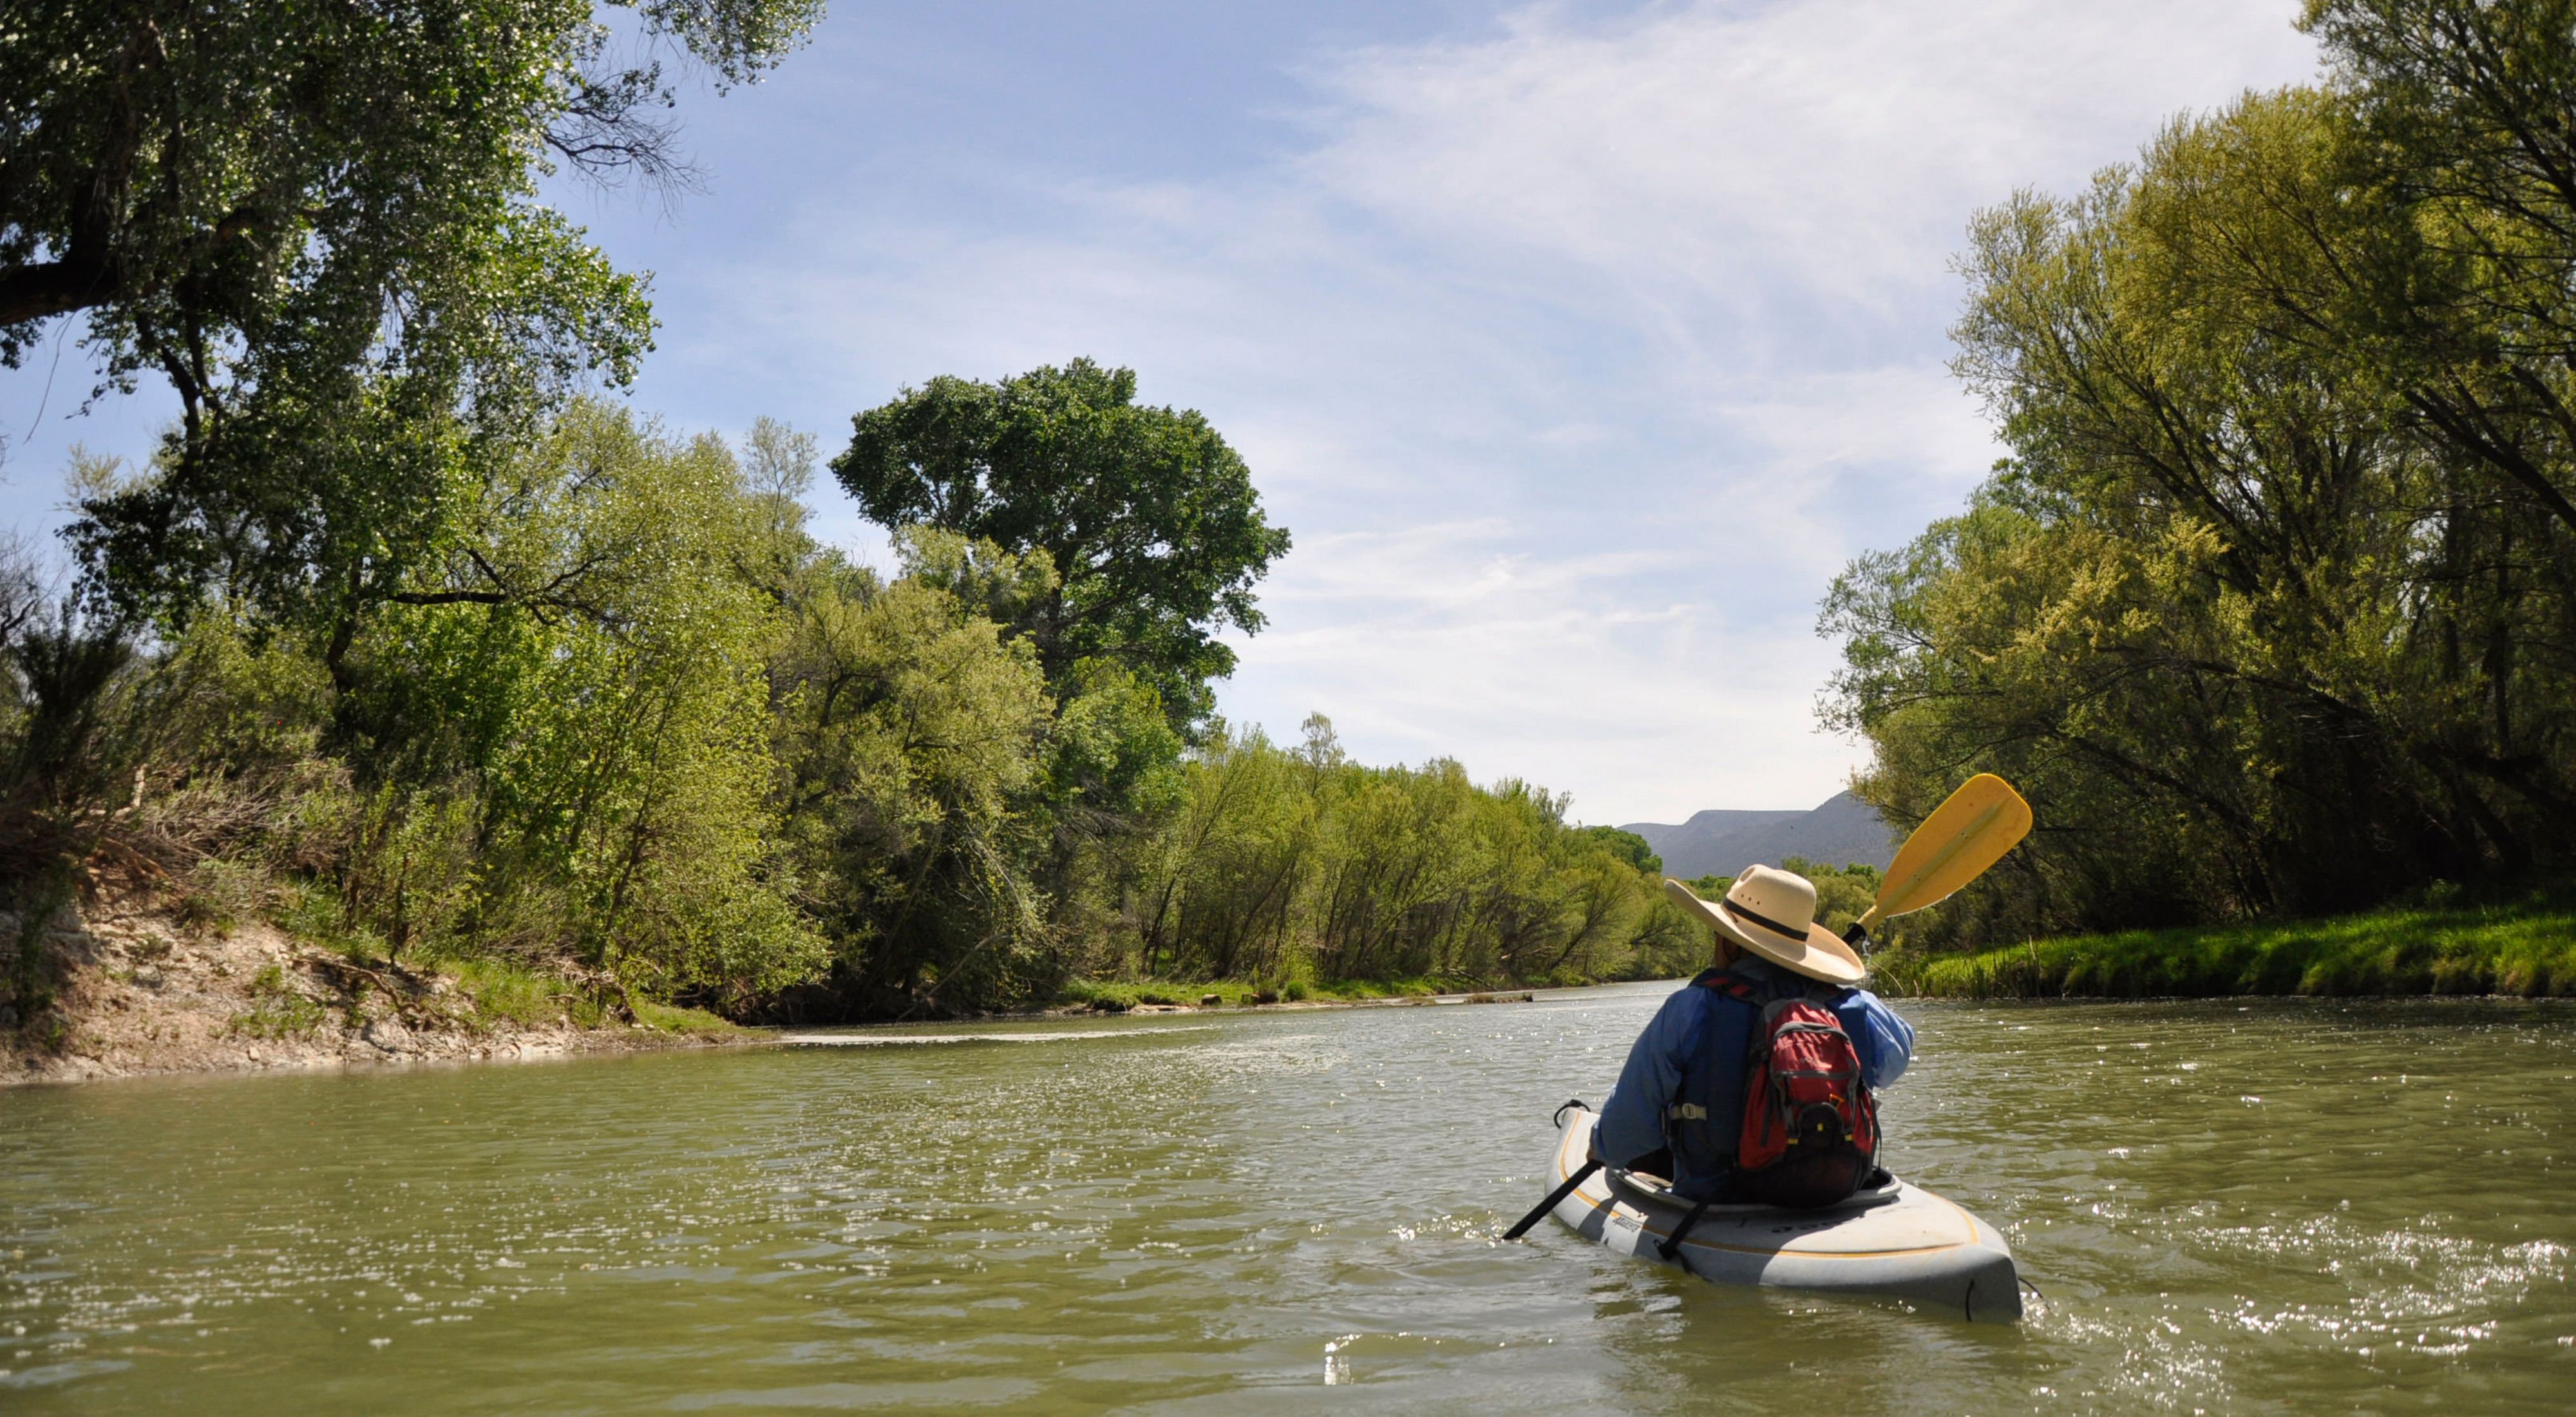 A person paddles down a river in a kayak